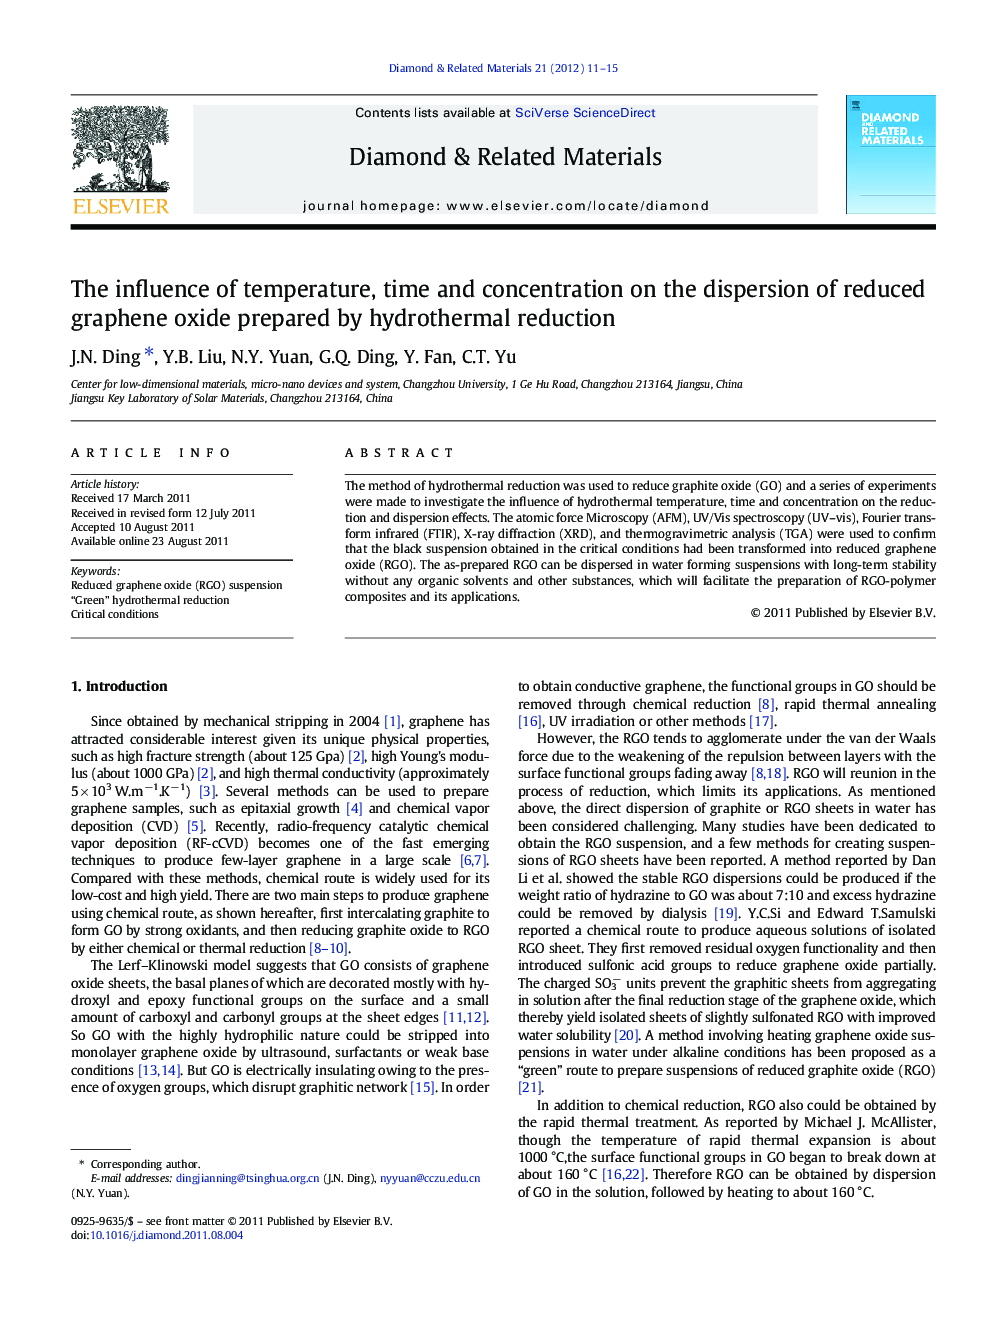 The influence of temperature, time and concentration on the dispersion of reduced graphene oxide prepared by hydrothermal reduction